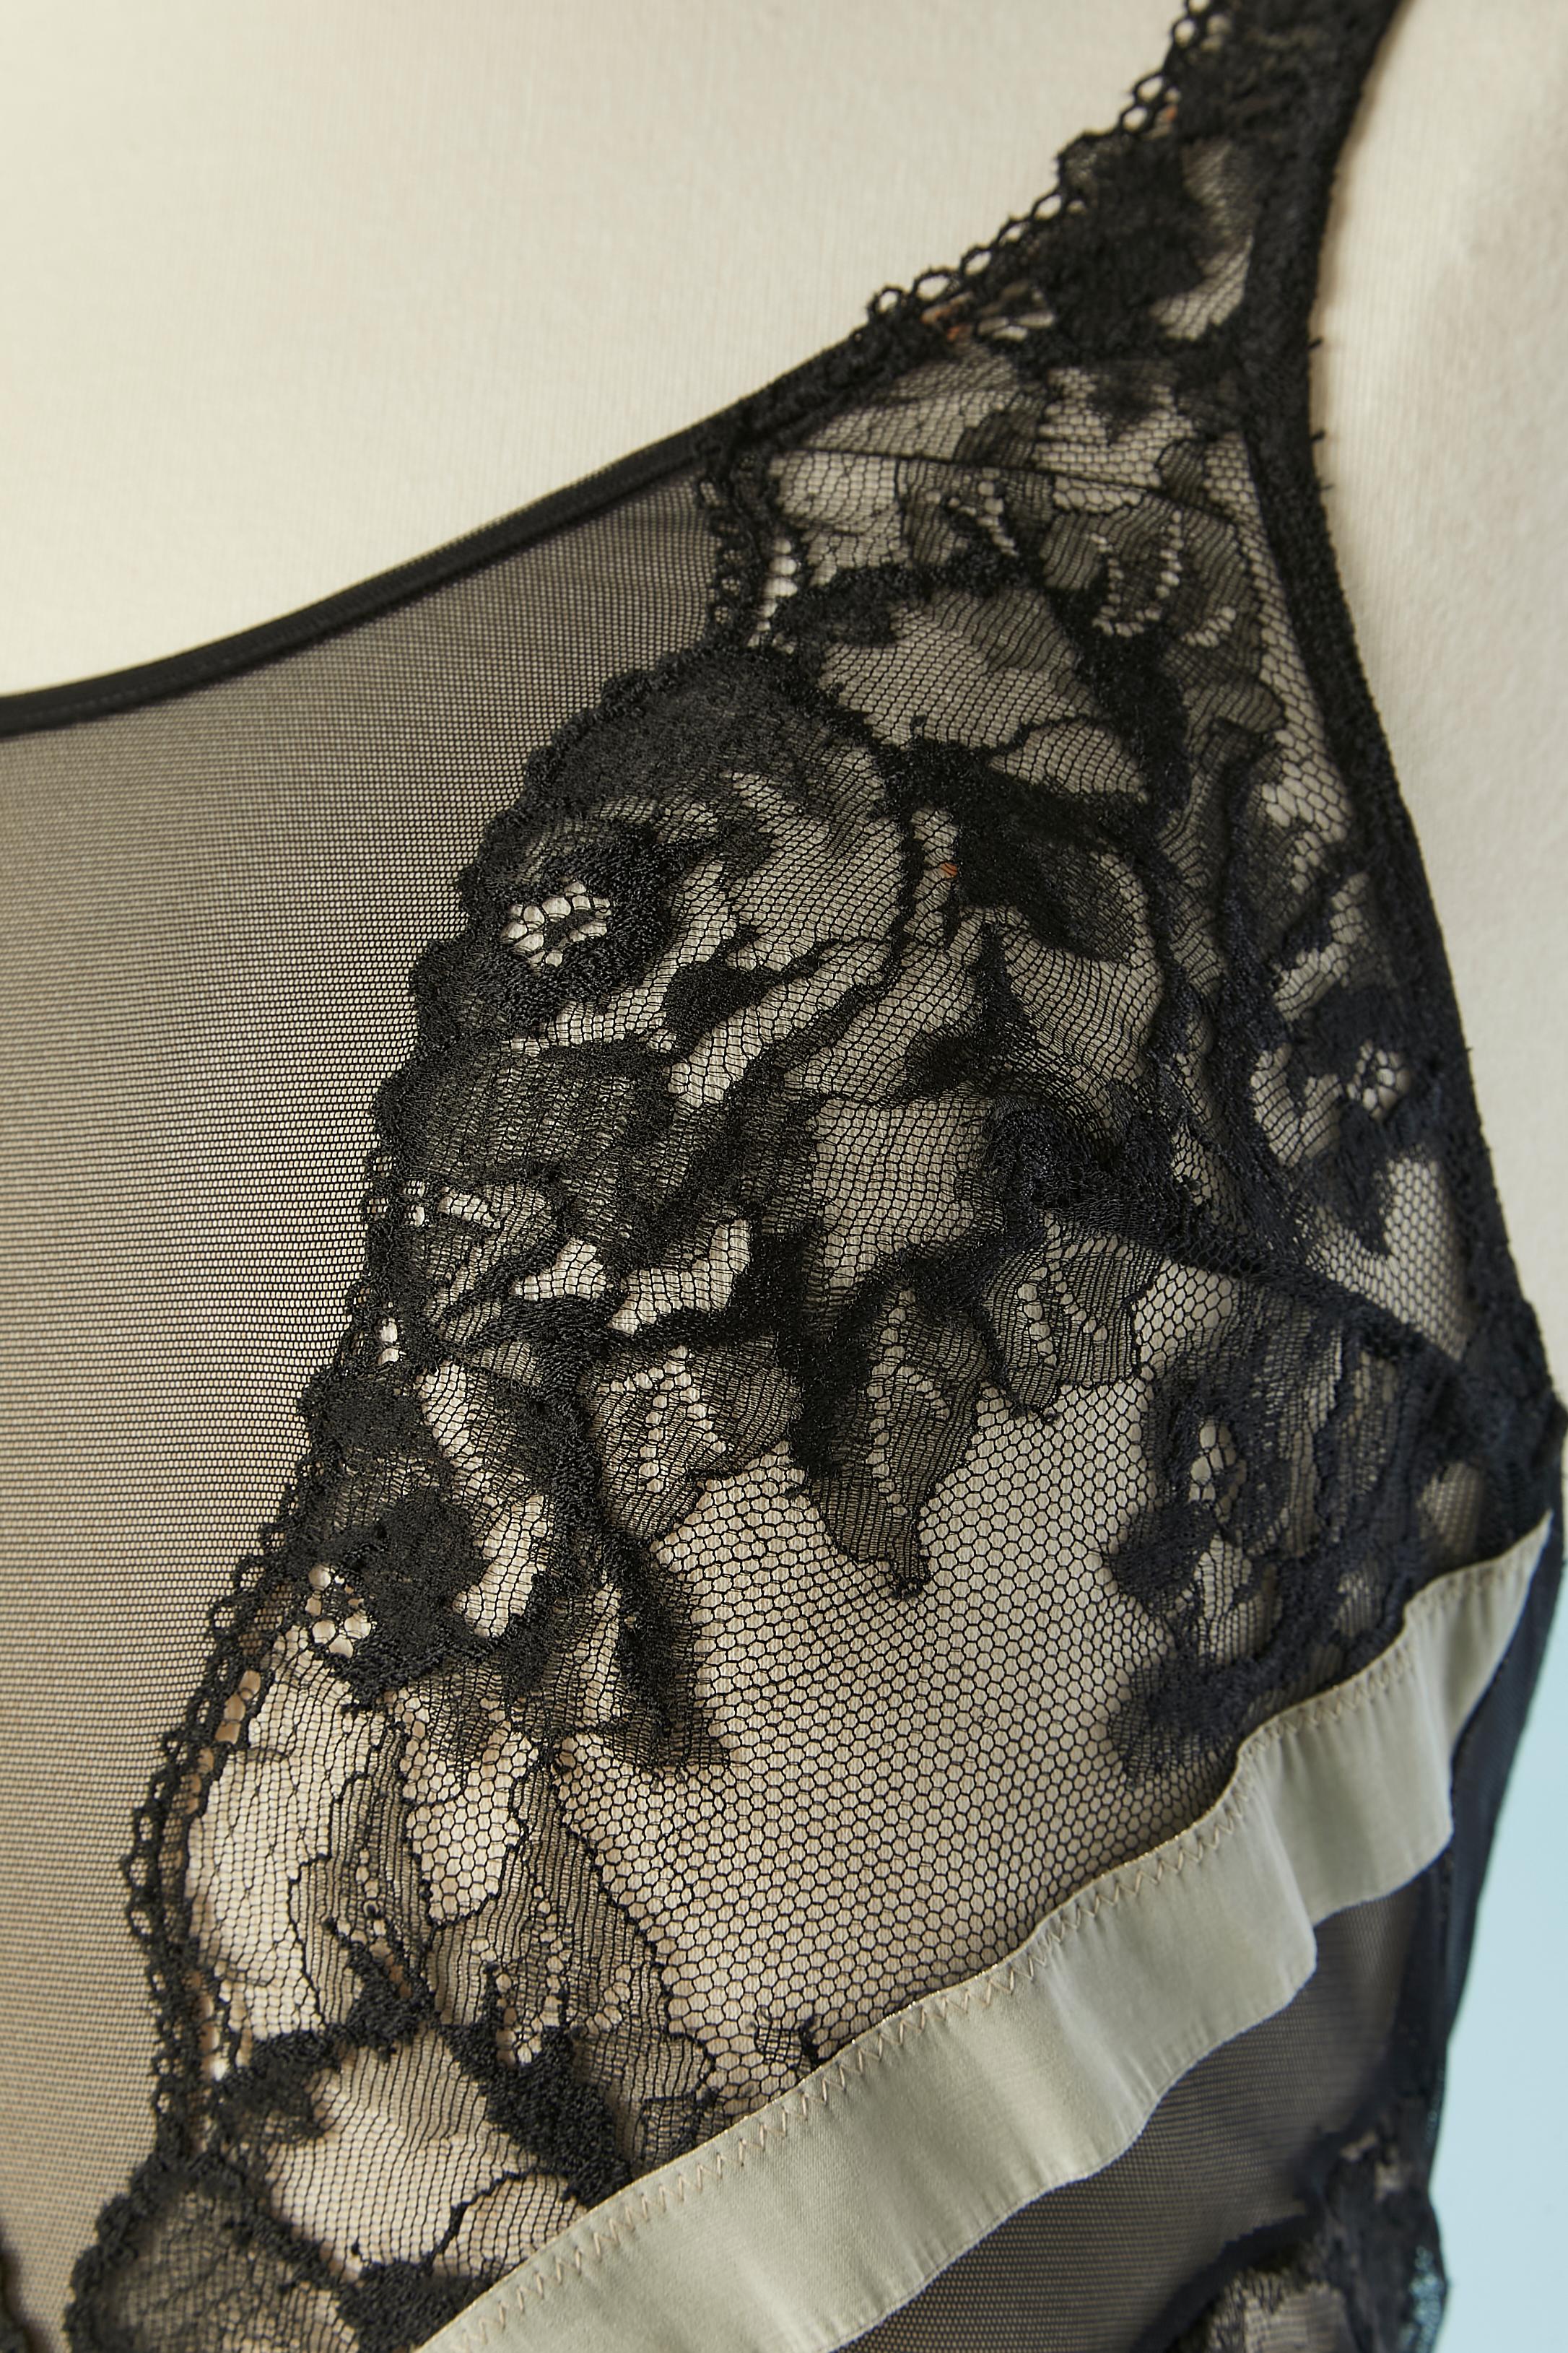 Black tulle bodysuit with lace appliqué.
No brand tag. Adjustable shoulder straps. Hook& eye on the inseam.
SIZE S